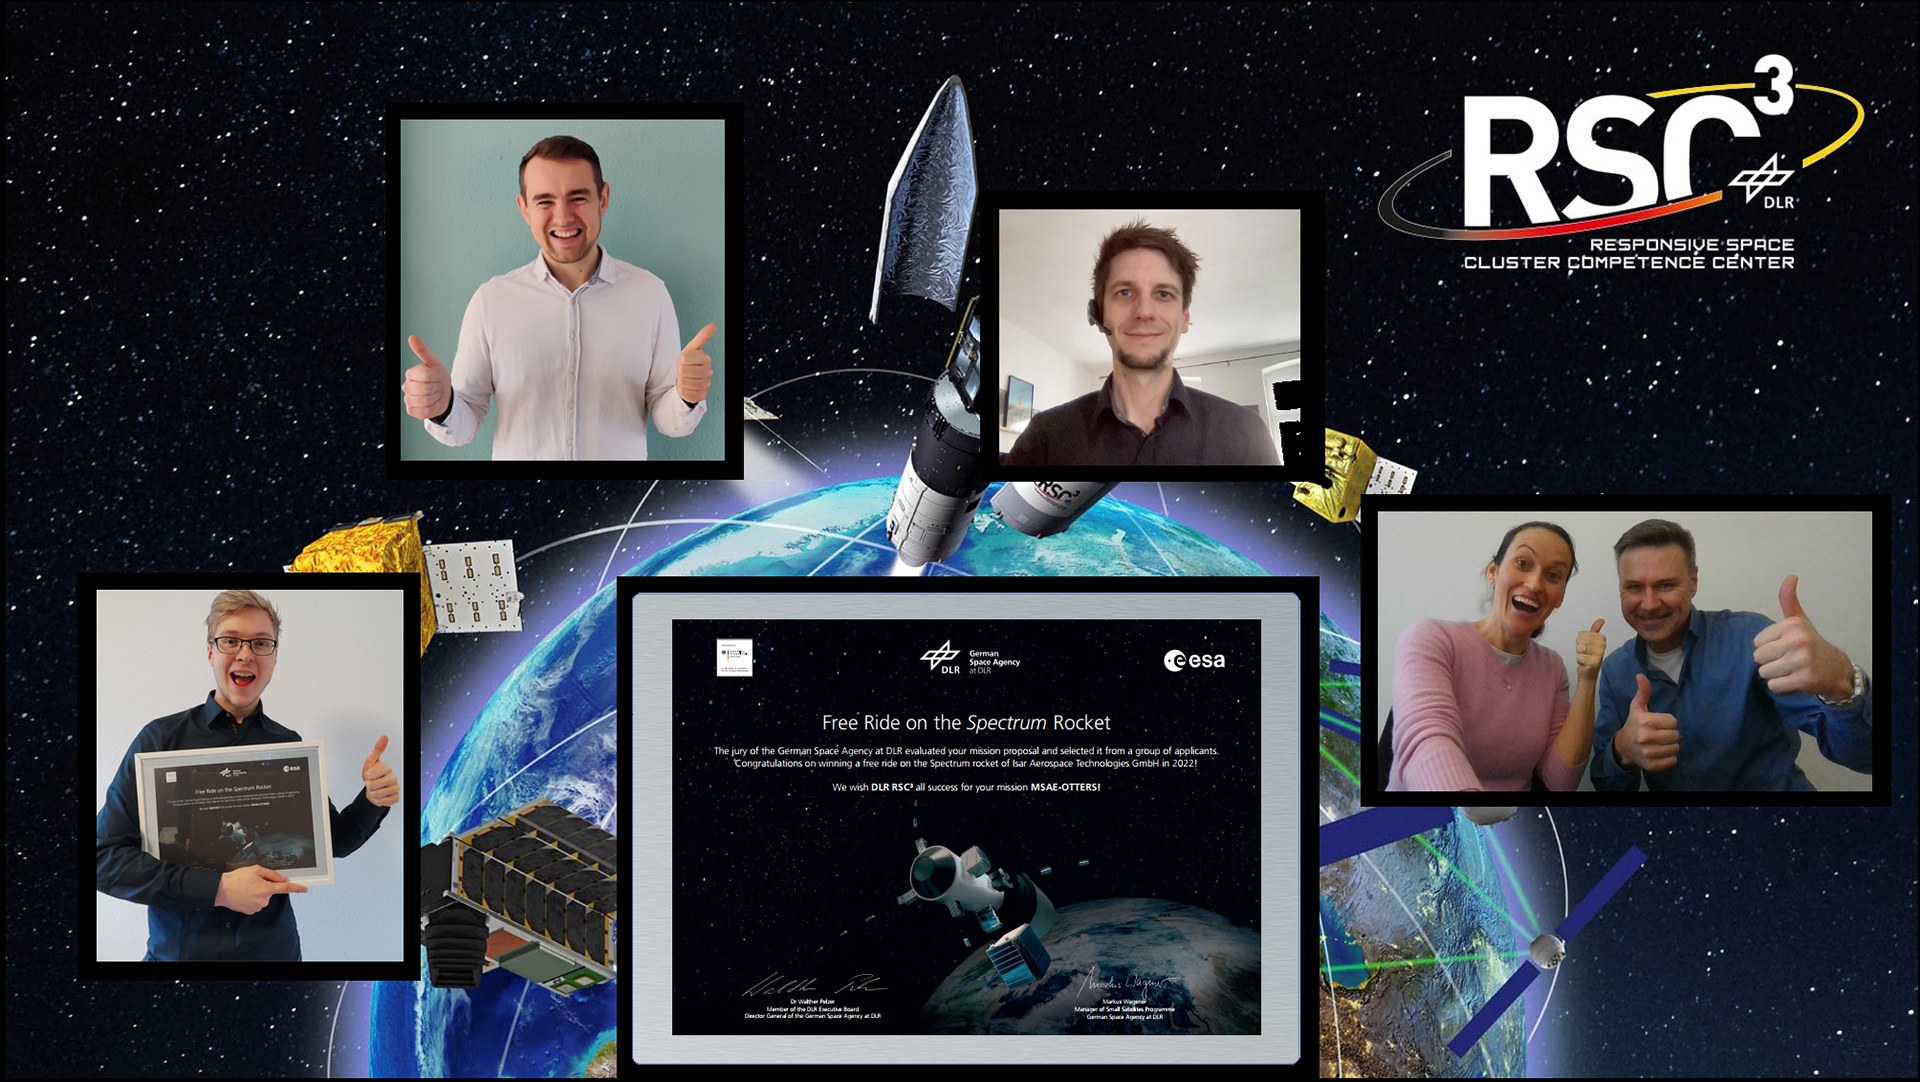 Winners of the First Payload Contest for the maiden flight of the German Spectrum microlauncher: DLR Responsive Space Cluster Compentence Center (RSC³), Trauen